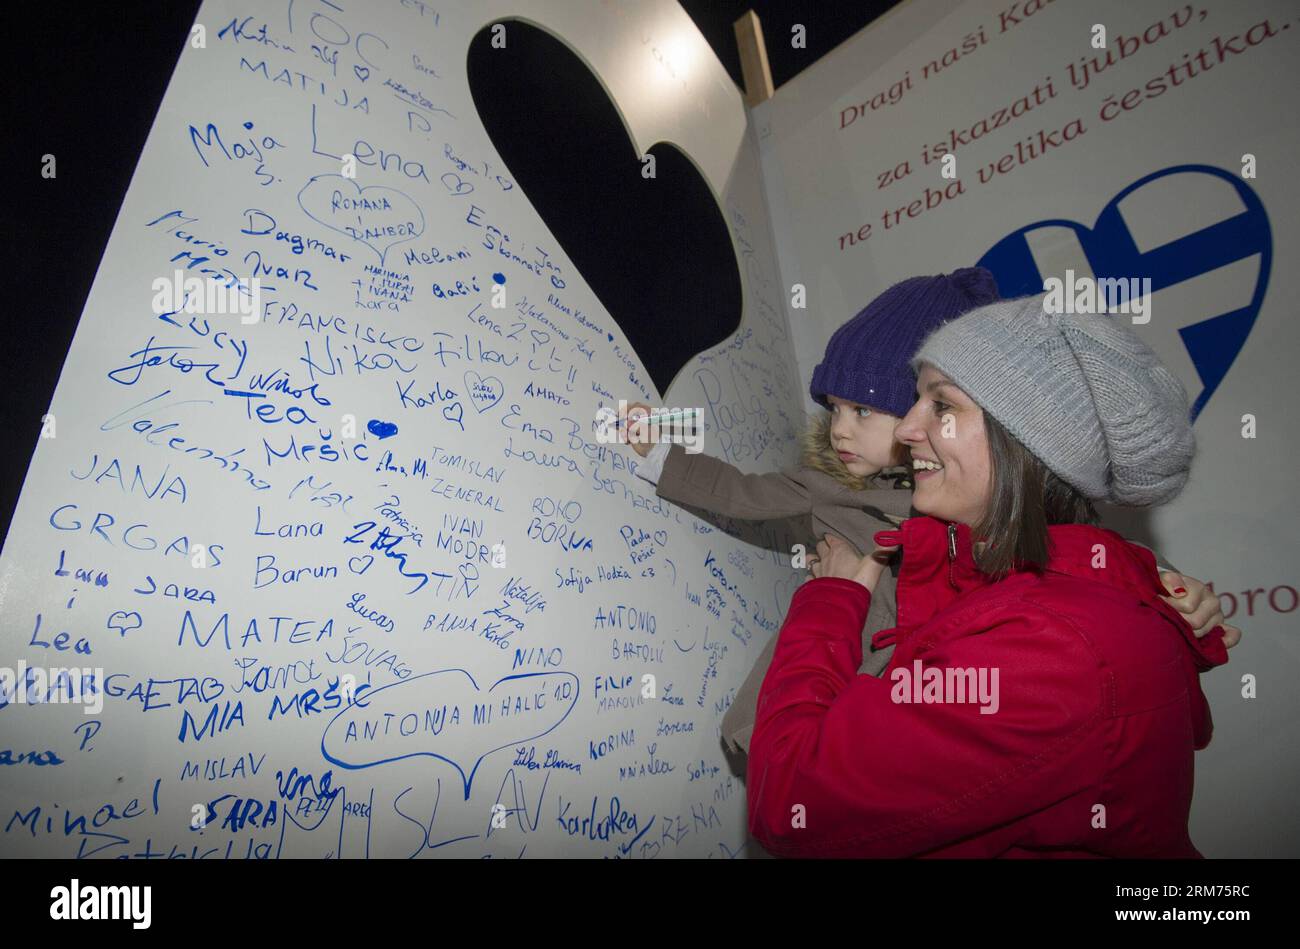 A kid signs her name on a huge card during the Lampionovo Lantern Festival in Zapresic, Croatia, Feb. 14, 2014. People released lanterns carrying their hopes and best wishes during the festival on Friday, and signed a huge Valentine s Day card to their twin town of Kastela. (Xinhua/Miso Lisanin) (zhf) CROATIA-ZAPRESIC-LANTERN FESTIVAL PUBLICATIONxNOTxINxCHN   a Kid Signs her Name ON a Huge Card during The  Lantern Festival in  Croatia Feb 14 2014 Celebrities released Lanterns carrying their Hopes and Best wishes during The Festival ON Friday and signed a Huge Valentine S Day Card to their Twin Stock Photo